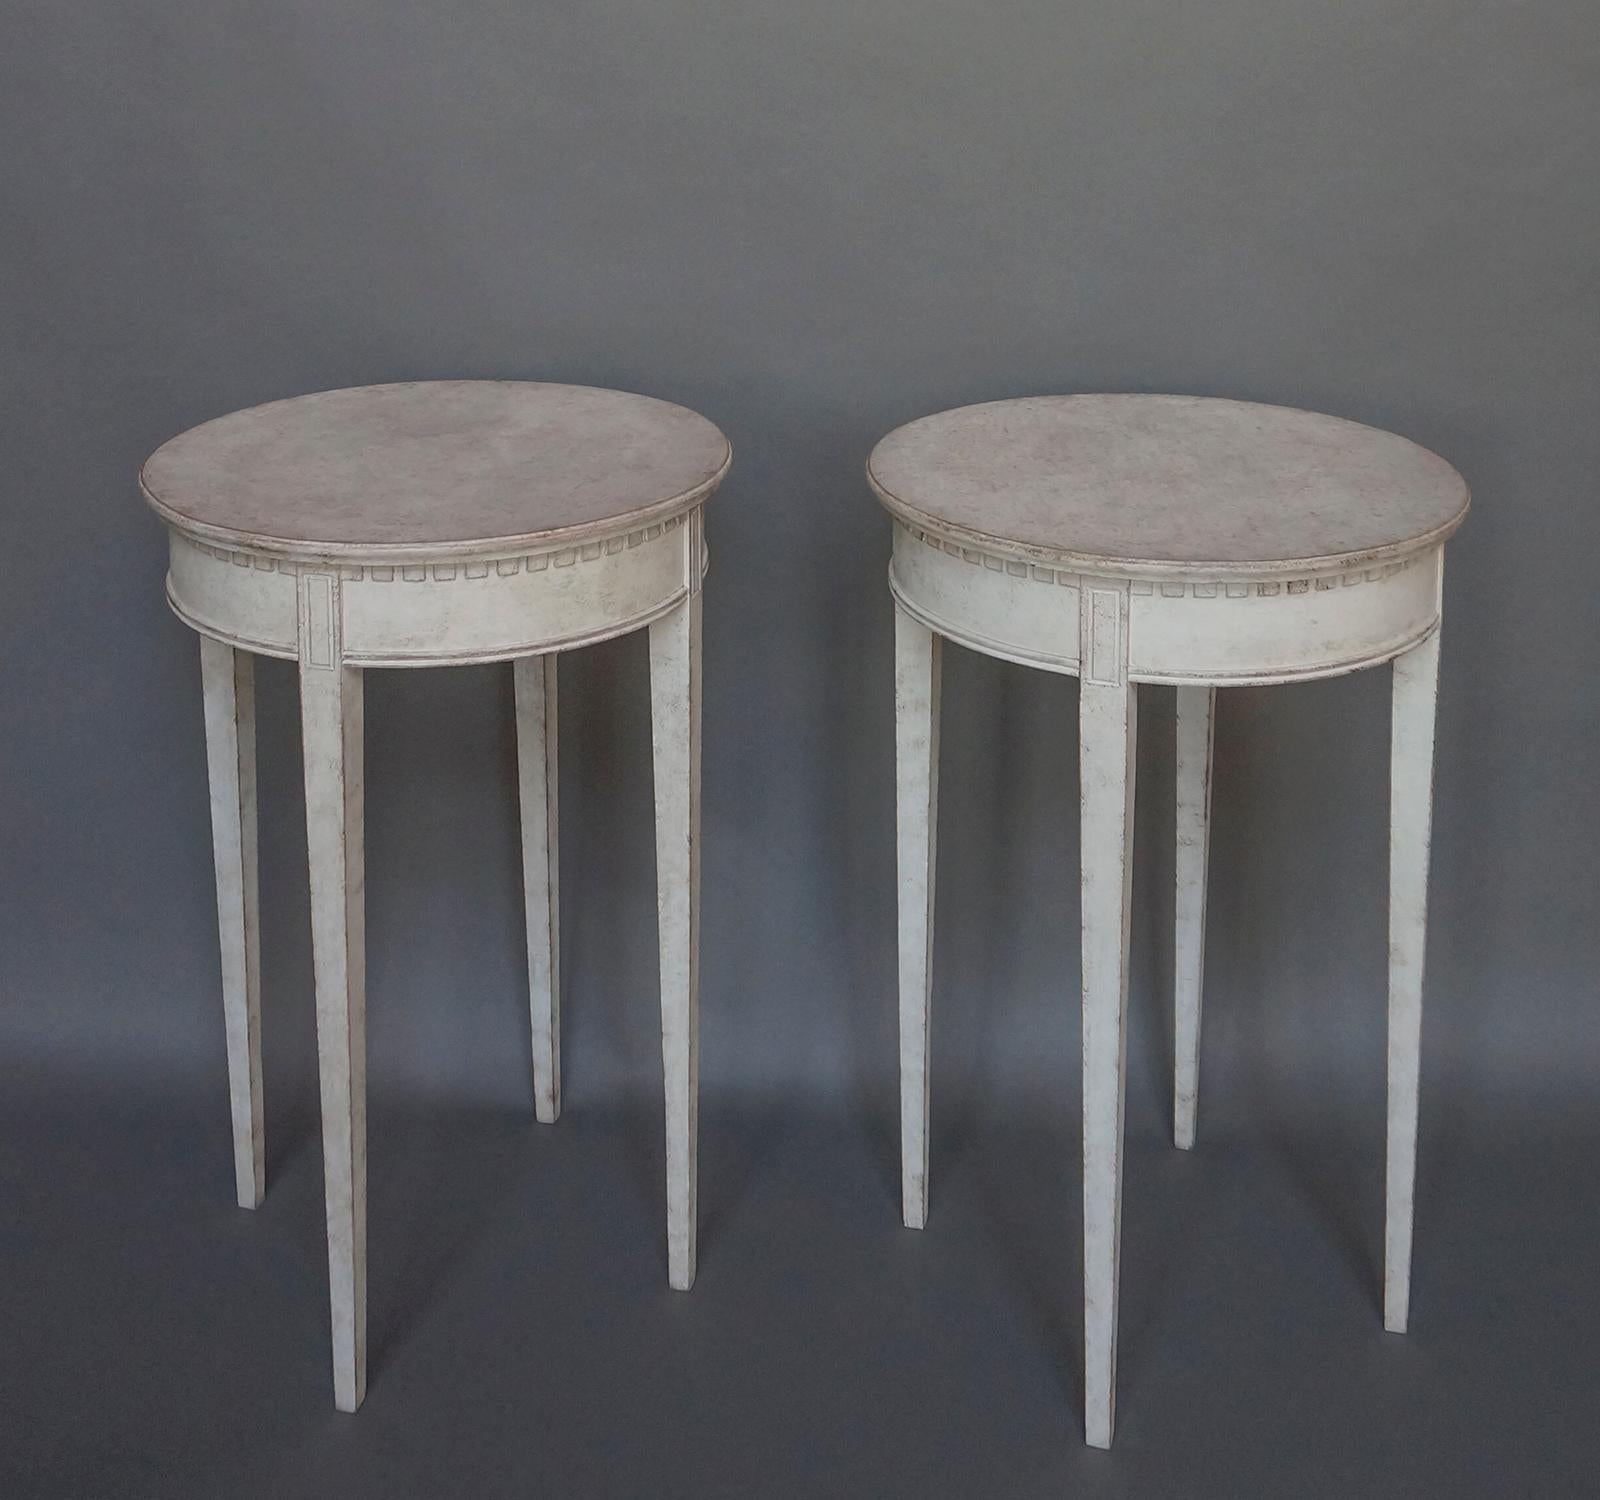 Pair of round occasional tables, Sweden circa 1880, each with four tapered legs and dentil molding under the top. Versatile small size.